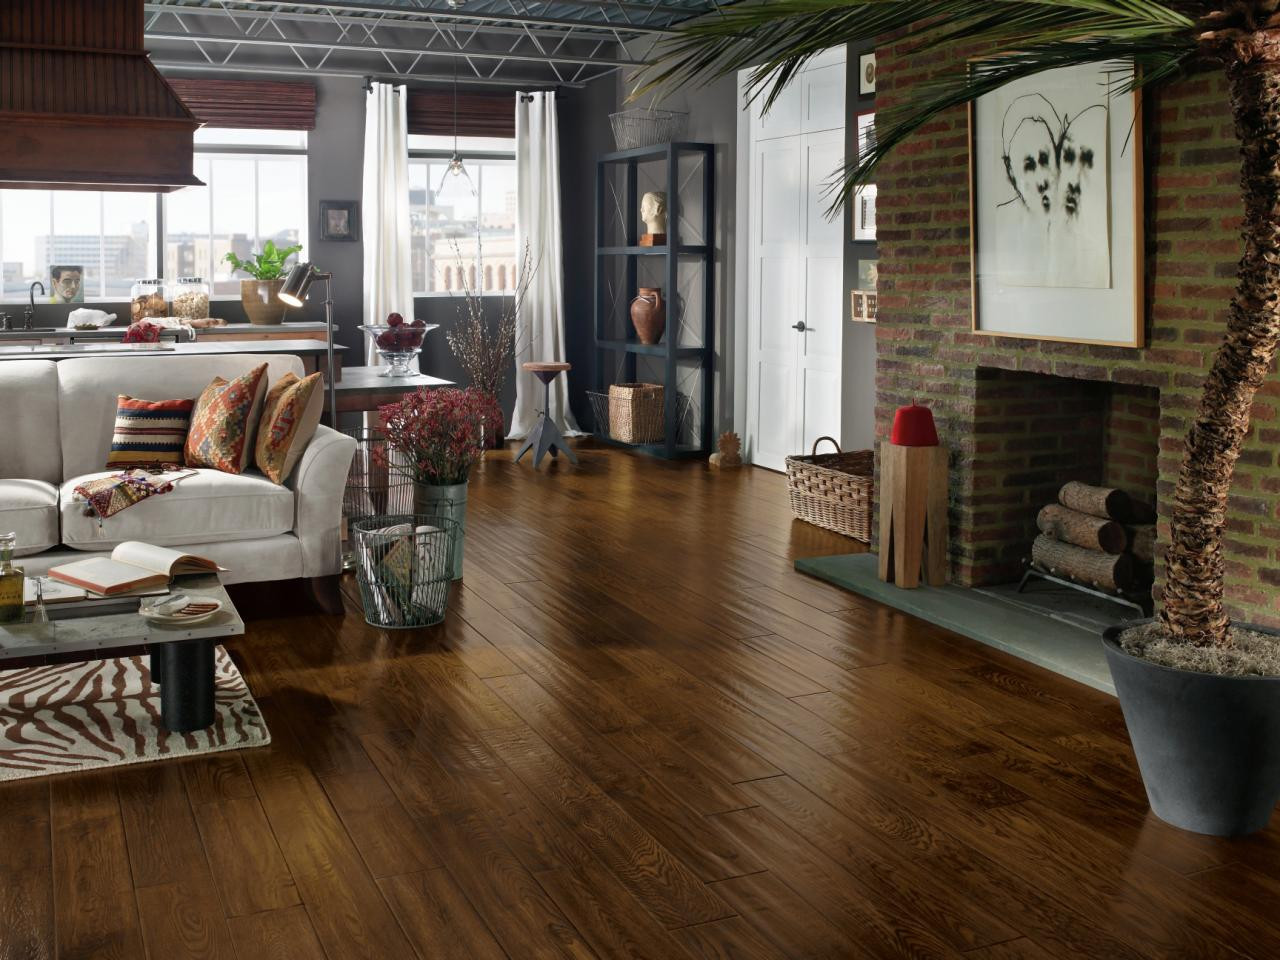 22 Lovely Hardwood Floor Options Home 2024 free download hardwood floor options home of living room ideas with hardwood floors good for would improve home pertaining to living room ideas with hardwood floors with fabulous ideas for become perfect 